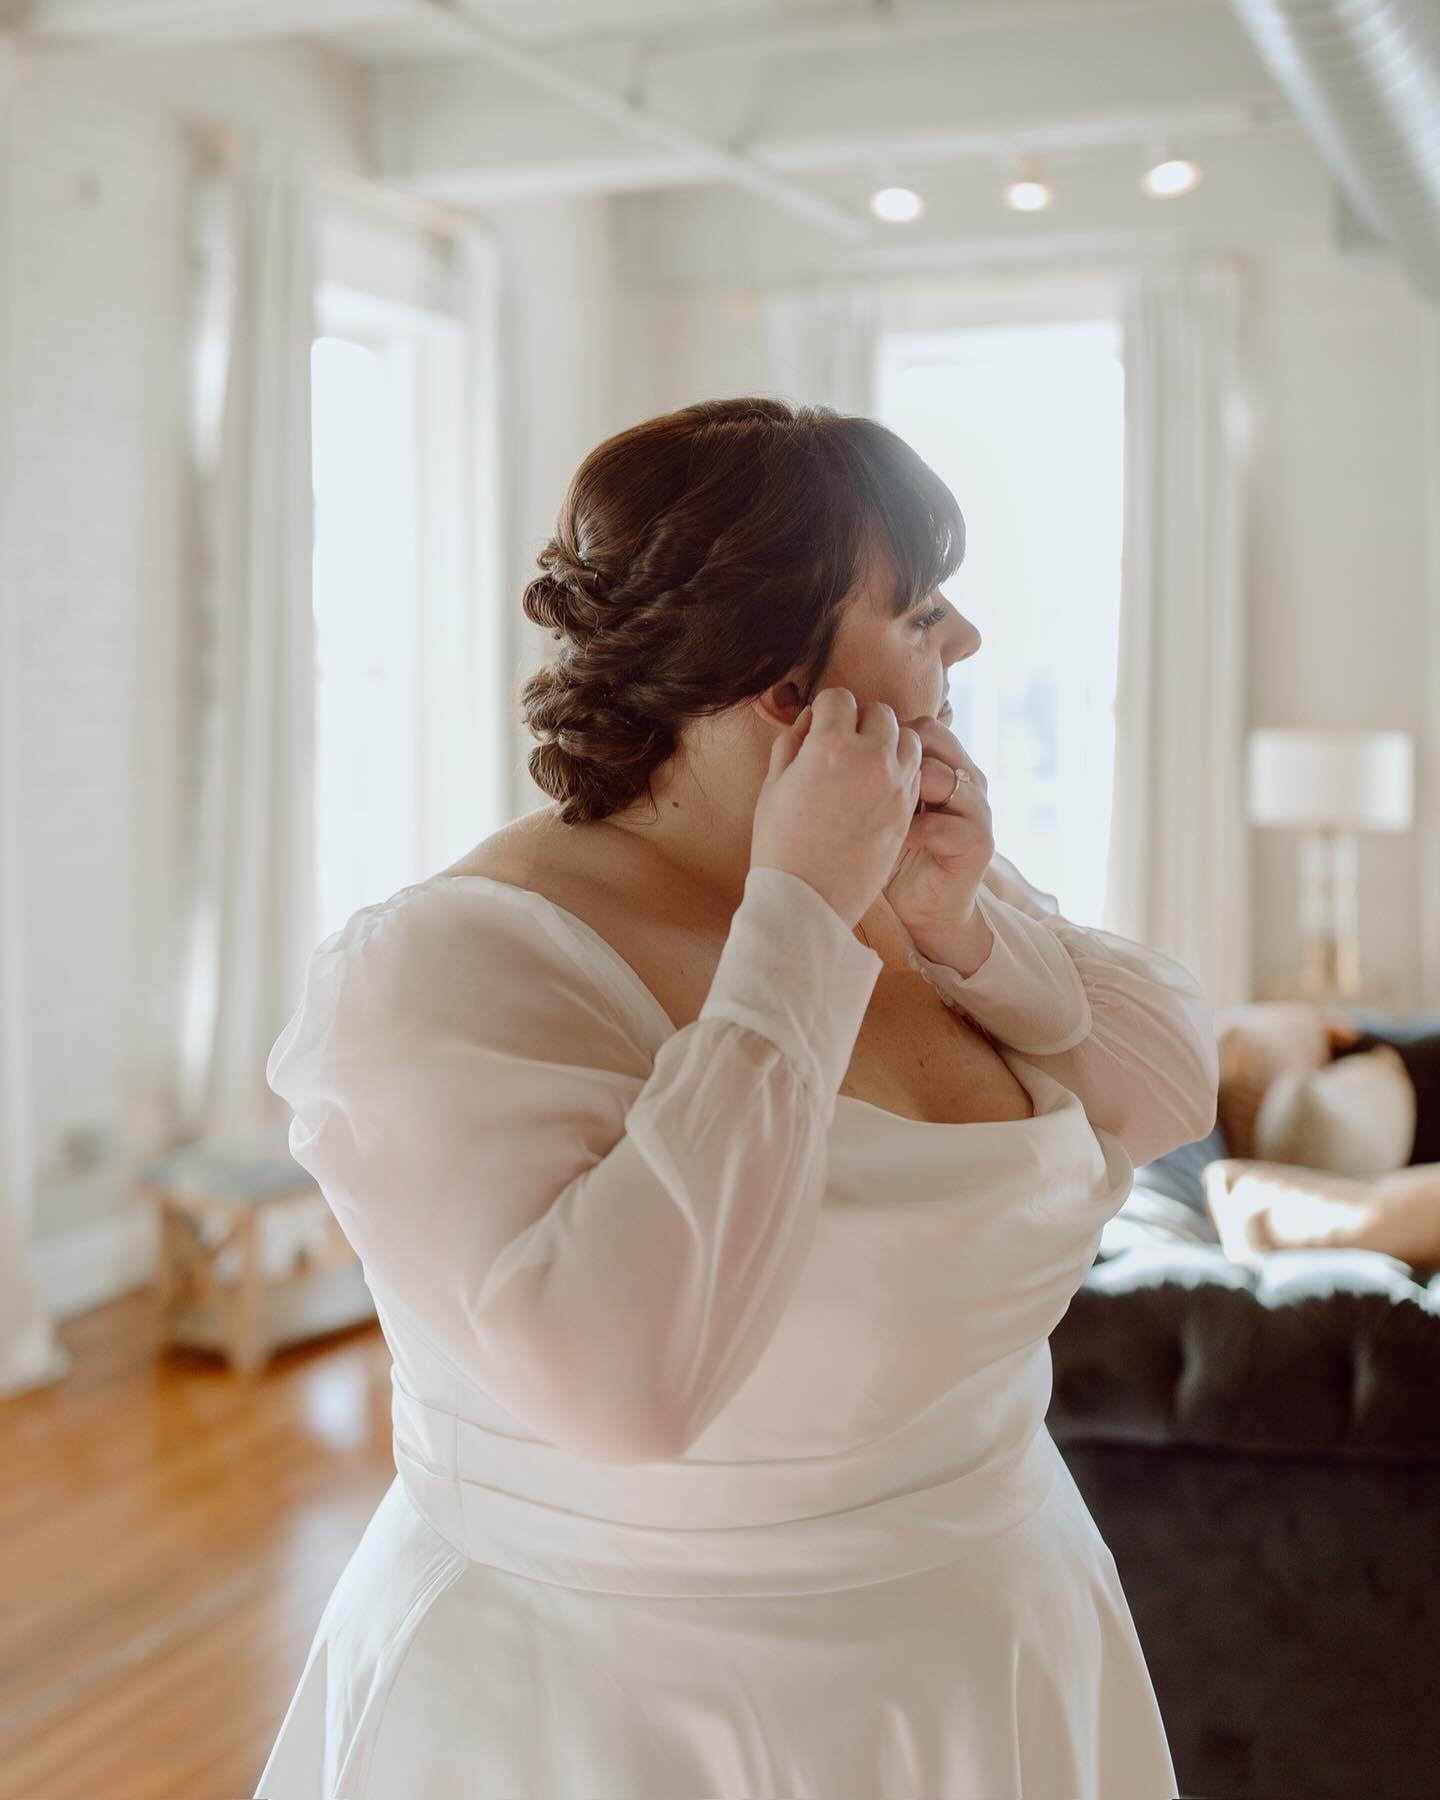 Sheer sleeve perfection 💫 We love when brides customize their dresses to create their own unique look! 

#lilybride Kelsey in Gracelyn by @jennyyoonyc with a custom sleeve created by @moscaalterations 

Photography: @Samantha.Ruth.Photography
Makeup